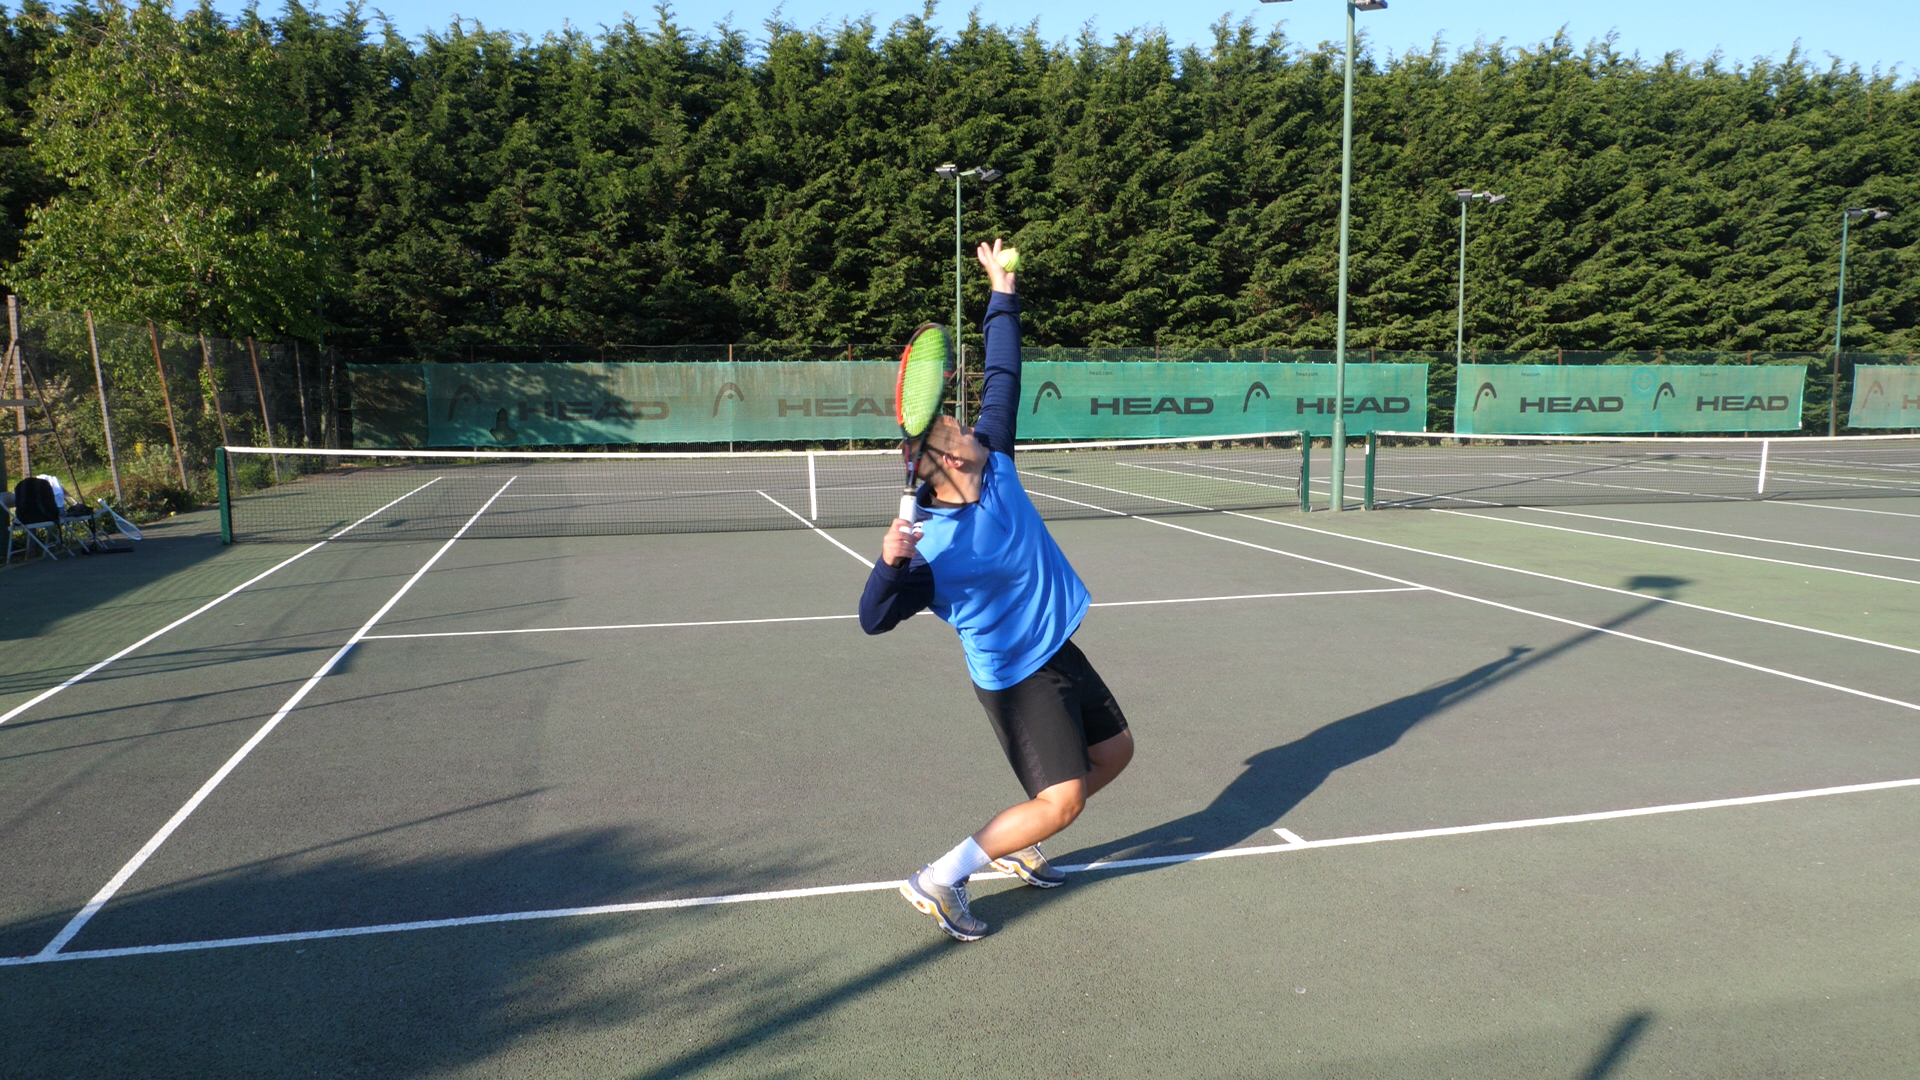 10 Ways To Improve Your Tennis Alone - Top Tennis Training